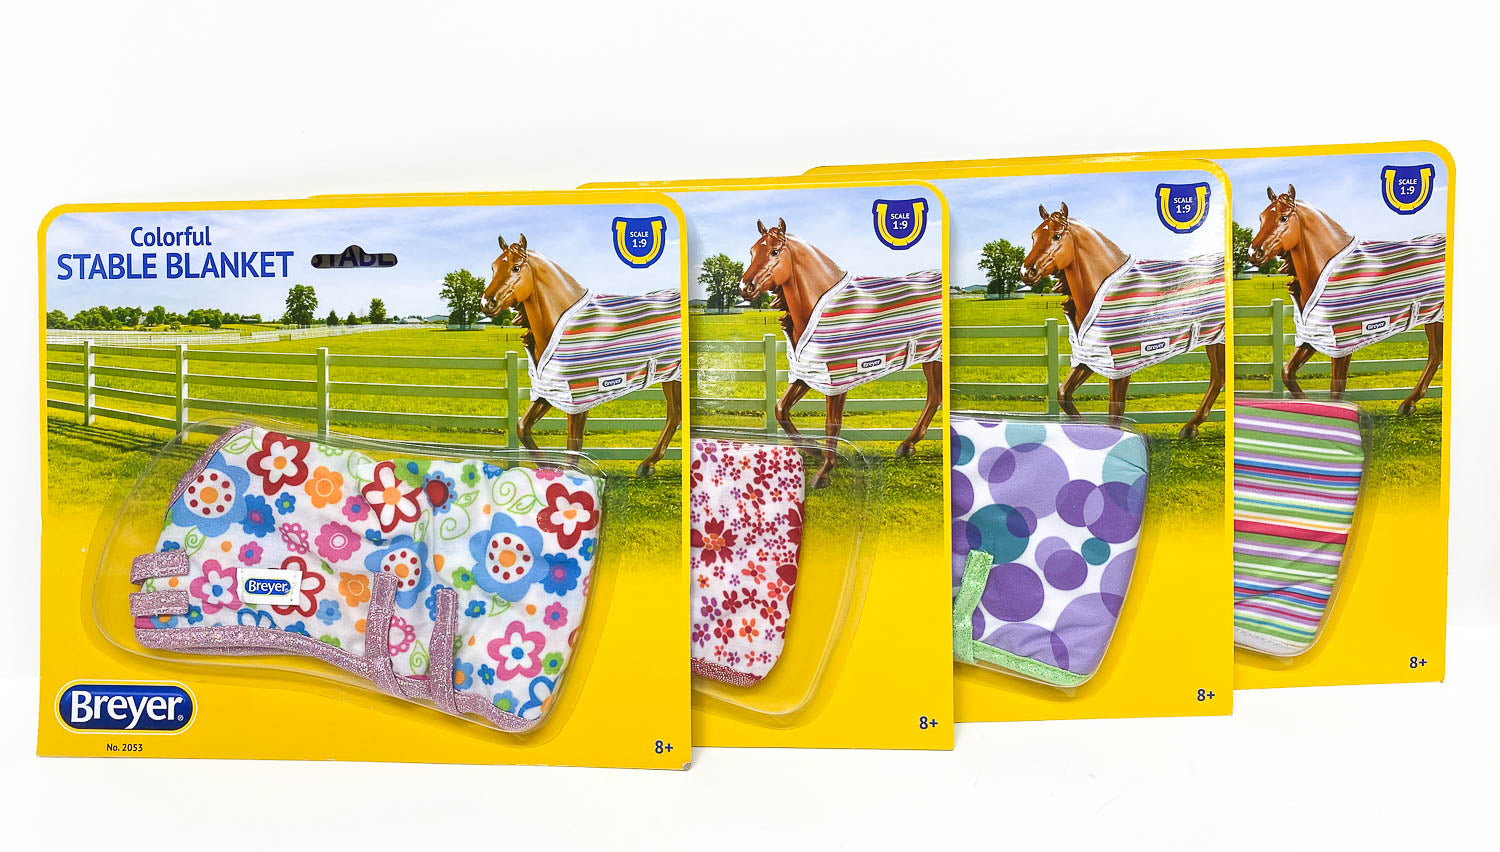 Breyer Colorful Stable Blanket - Your Choice of Patterns – Triple